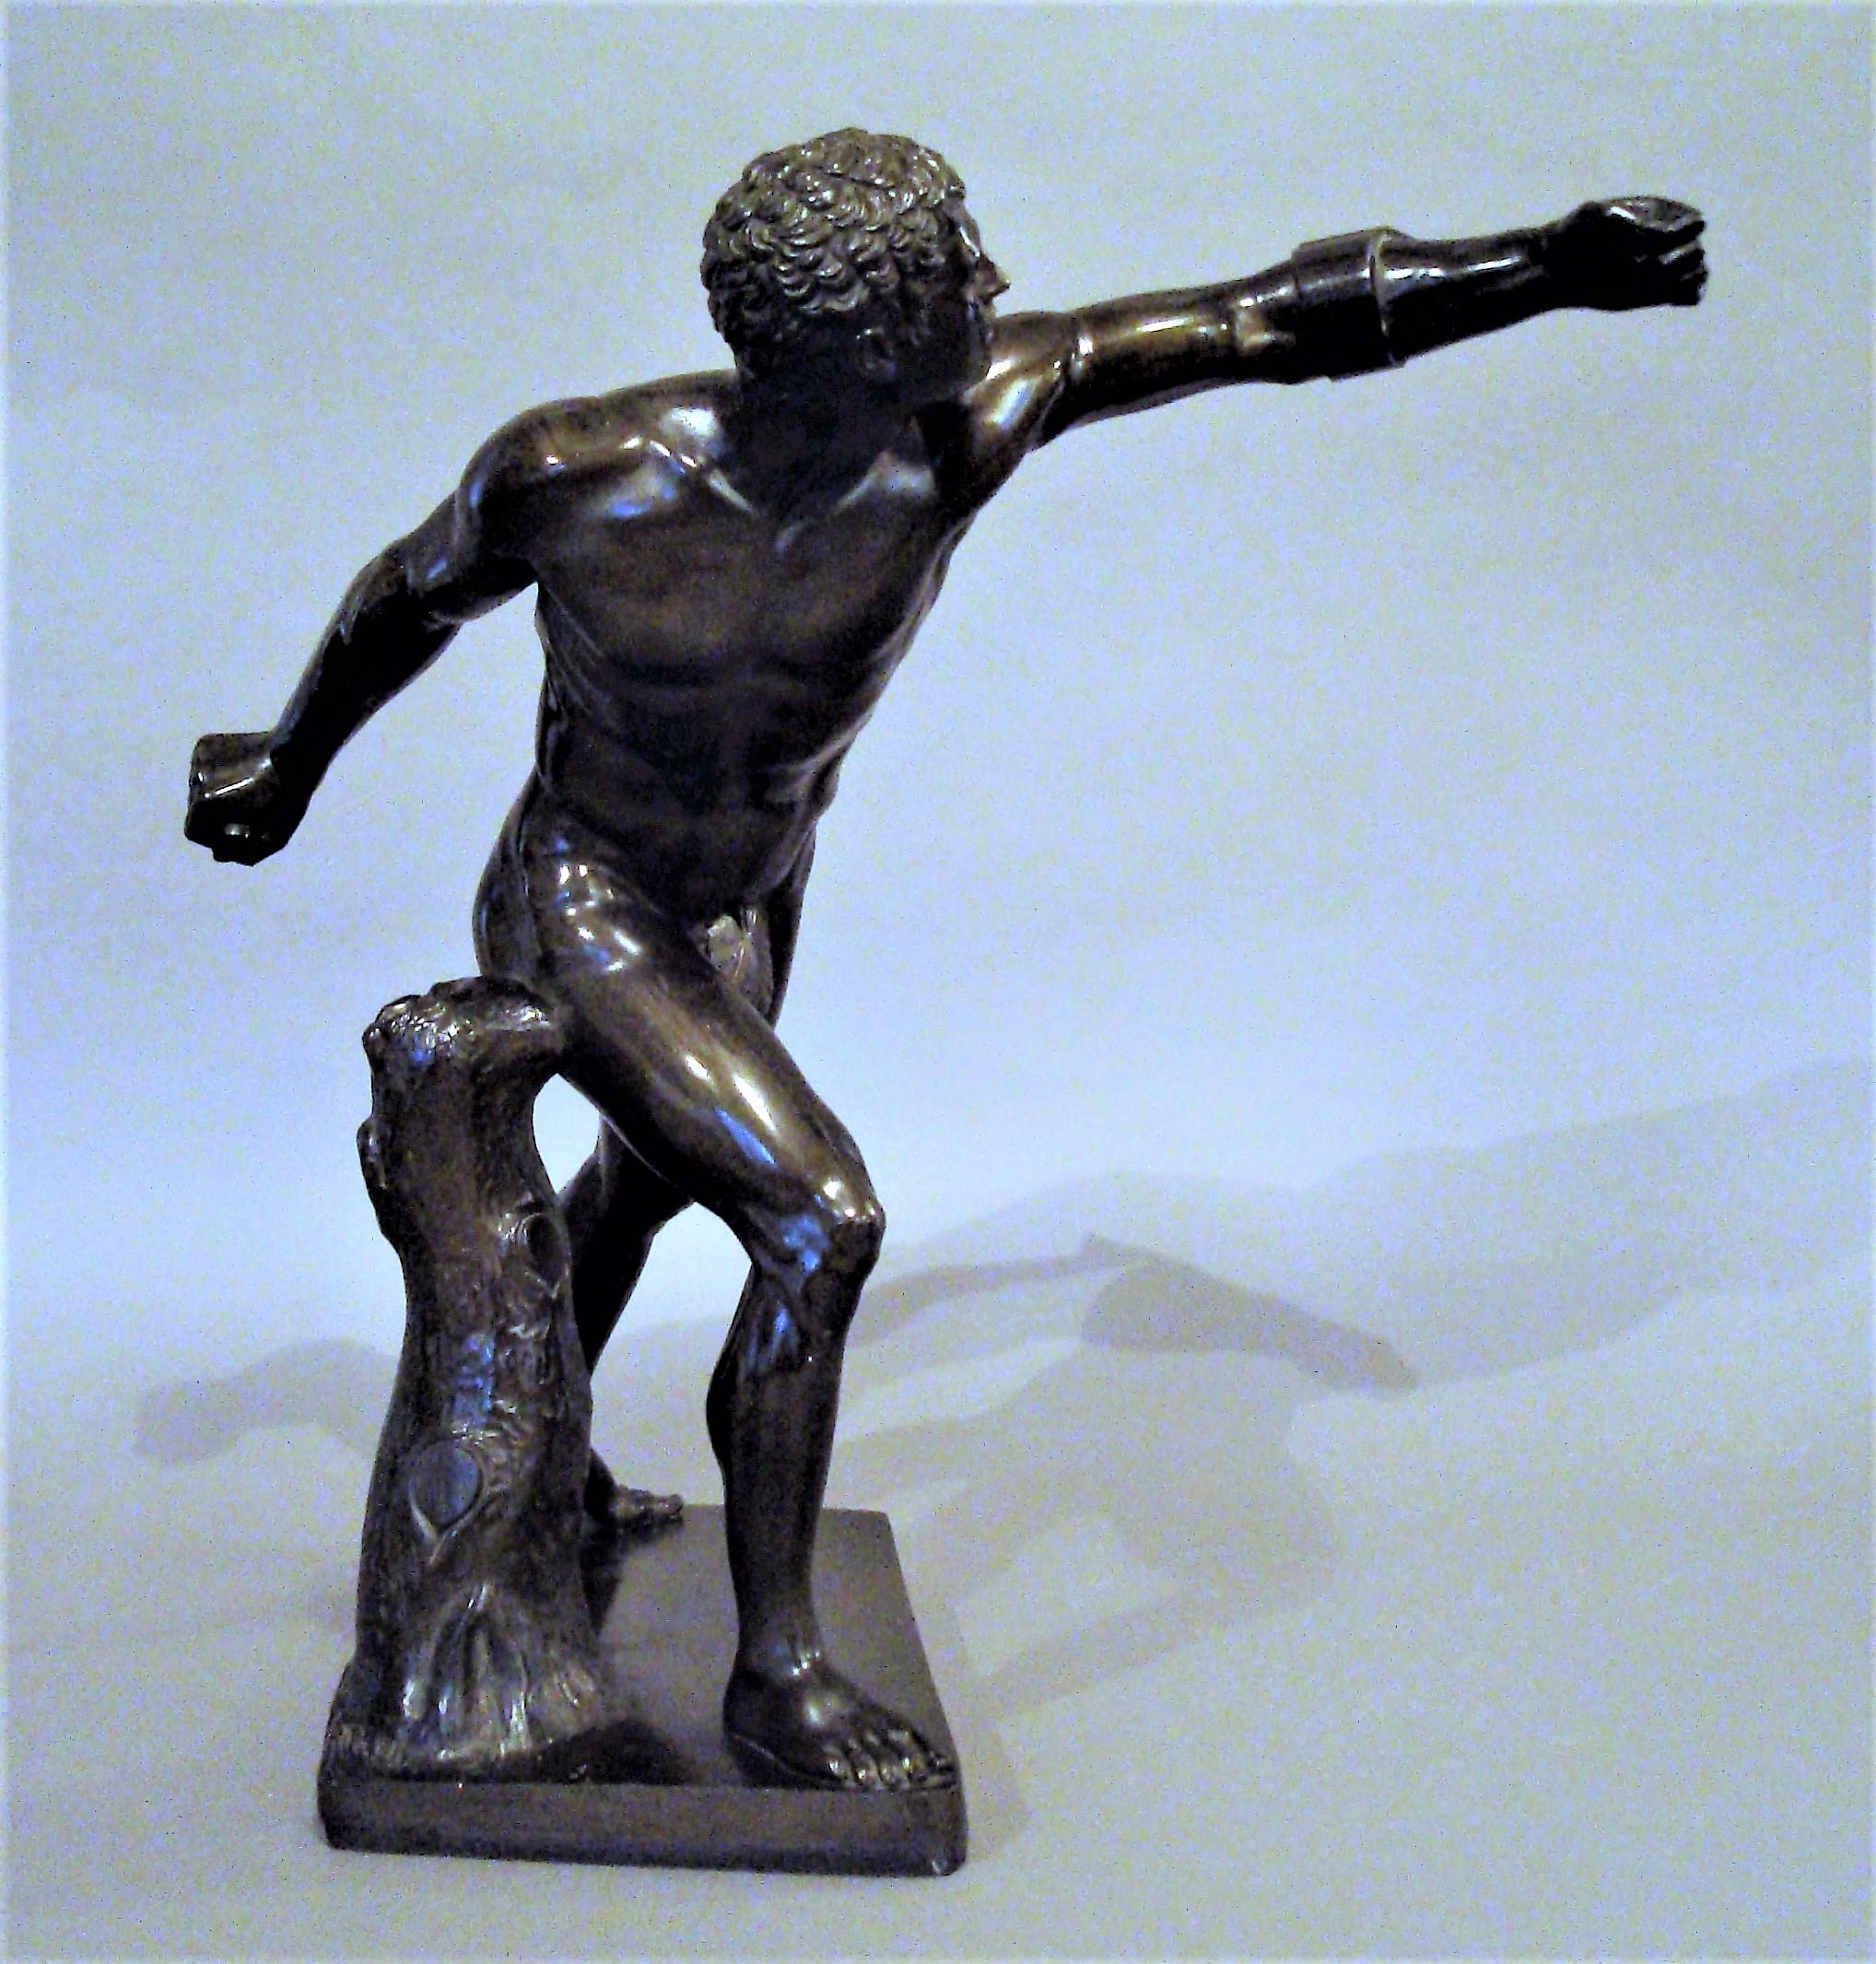 Polished 19th Century Grand Tour Classical Bronze Sculpture of Borghese Gladiator